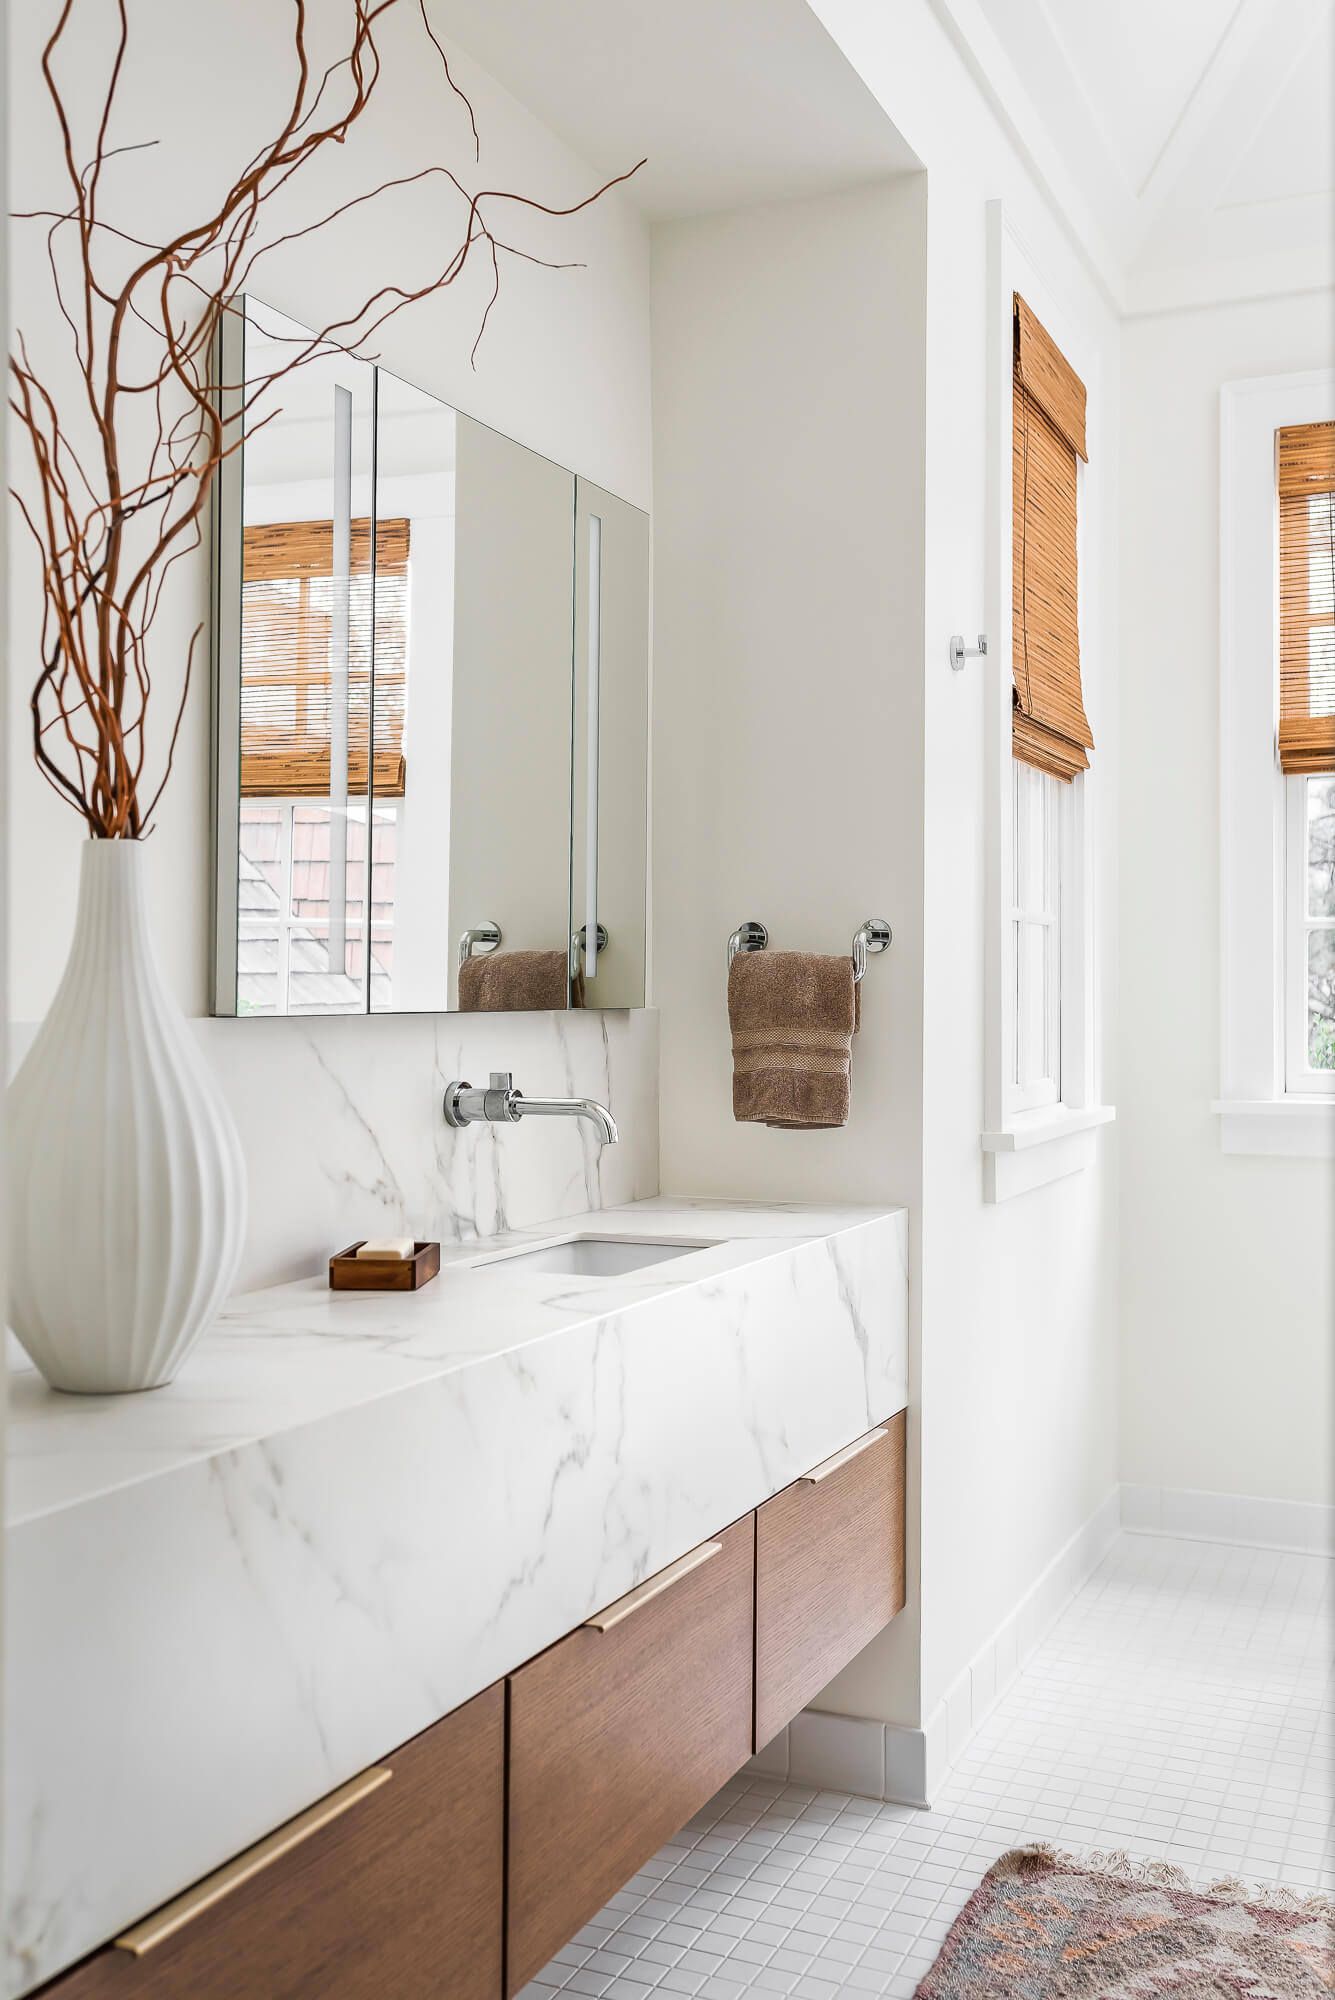 An elegant floating bathroom vanity with two deep drawers and a very think and tall vanity countertop in a white quartz material. The inset in the wall framed the vanity and mirror.